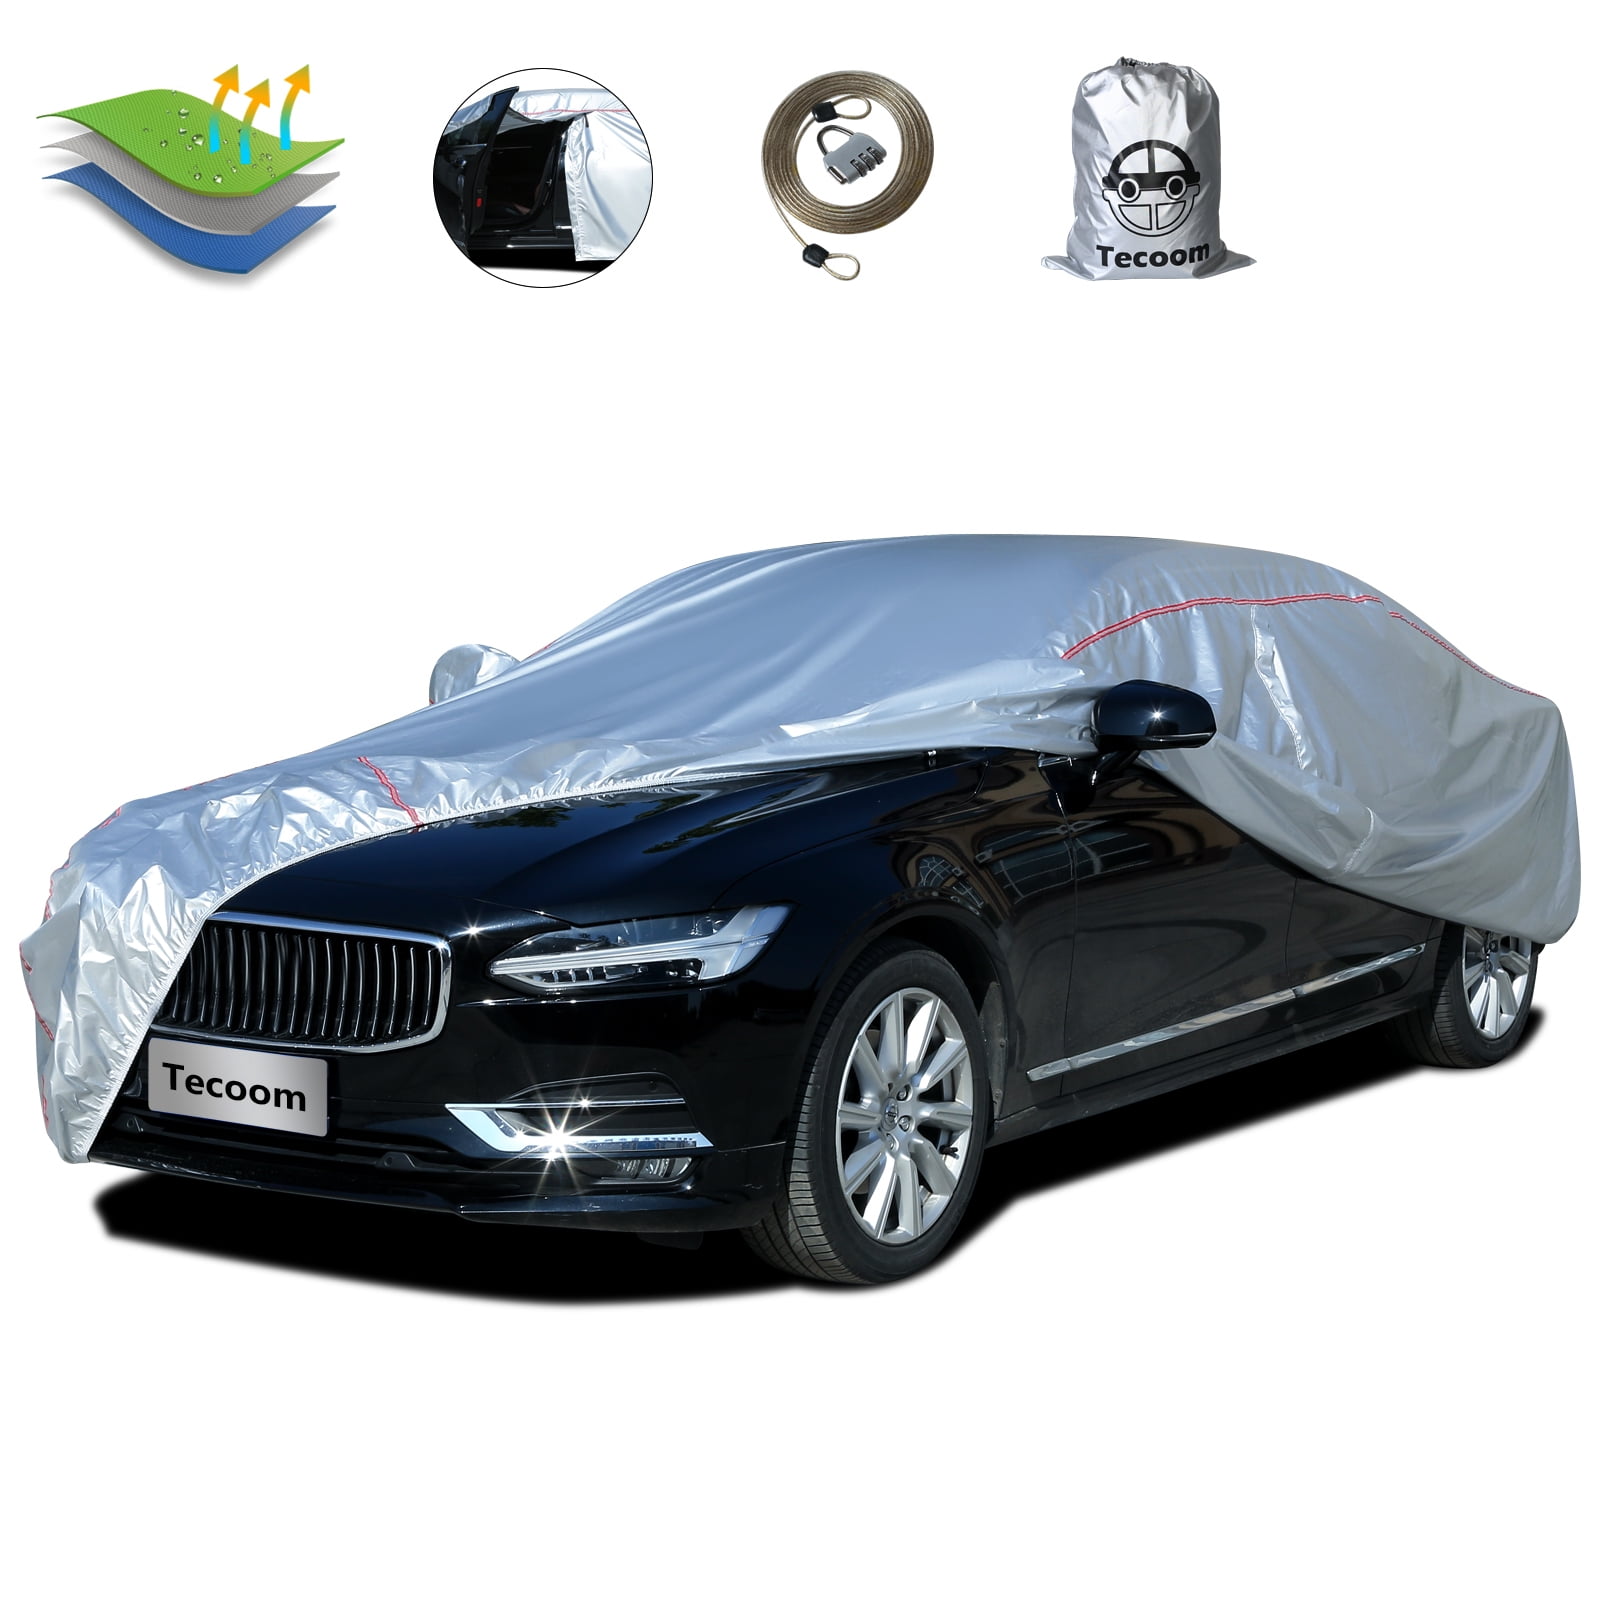  Car Cover Waterproof for Audi TT 8N, TT 8J, TT 8S, Outdoor Car  Covers Waterproof Breathable Large Car Cover with Zipper, Custom Full Car  Cover Dustproof Scratchproof Sun-Resistant (Color : Silver